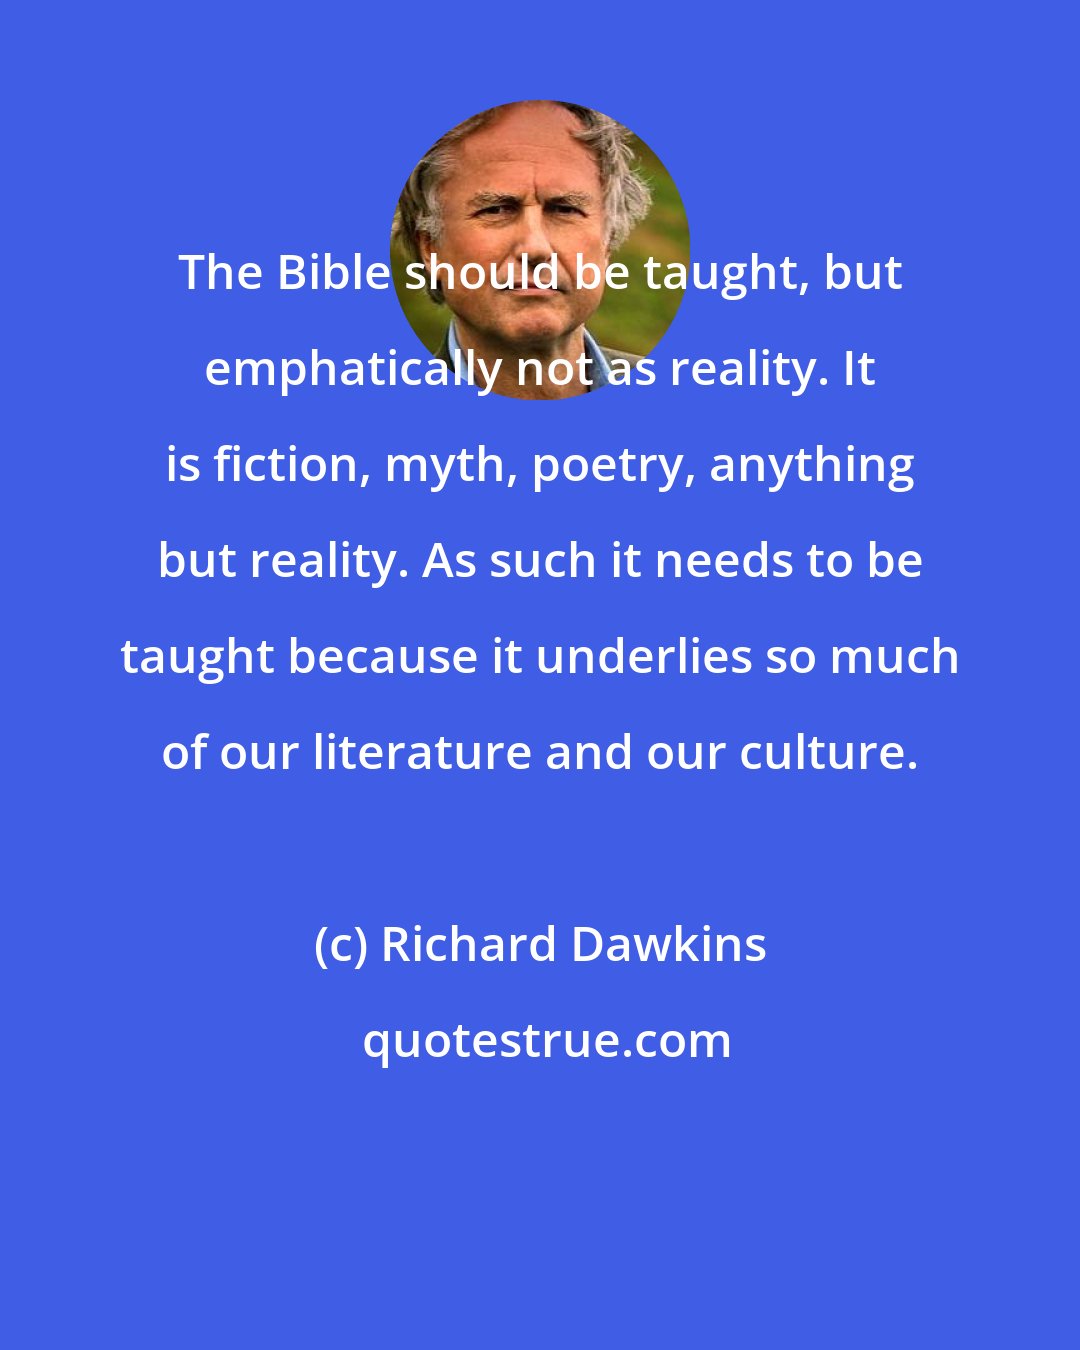 Richard Dawkins: The Bible should be taught, but emphatically not as reality. It is fiction, myth, poetry, anything but reality. As such it needs to be taught because it underlies so much of our literature and our culture.